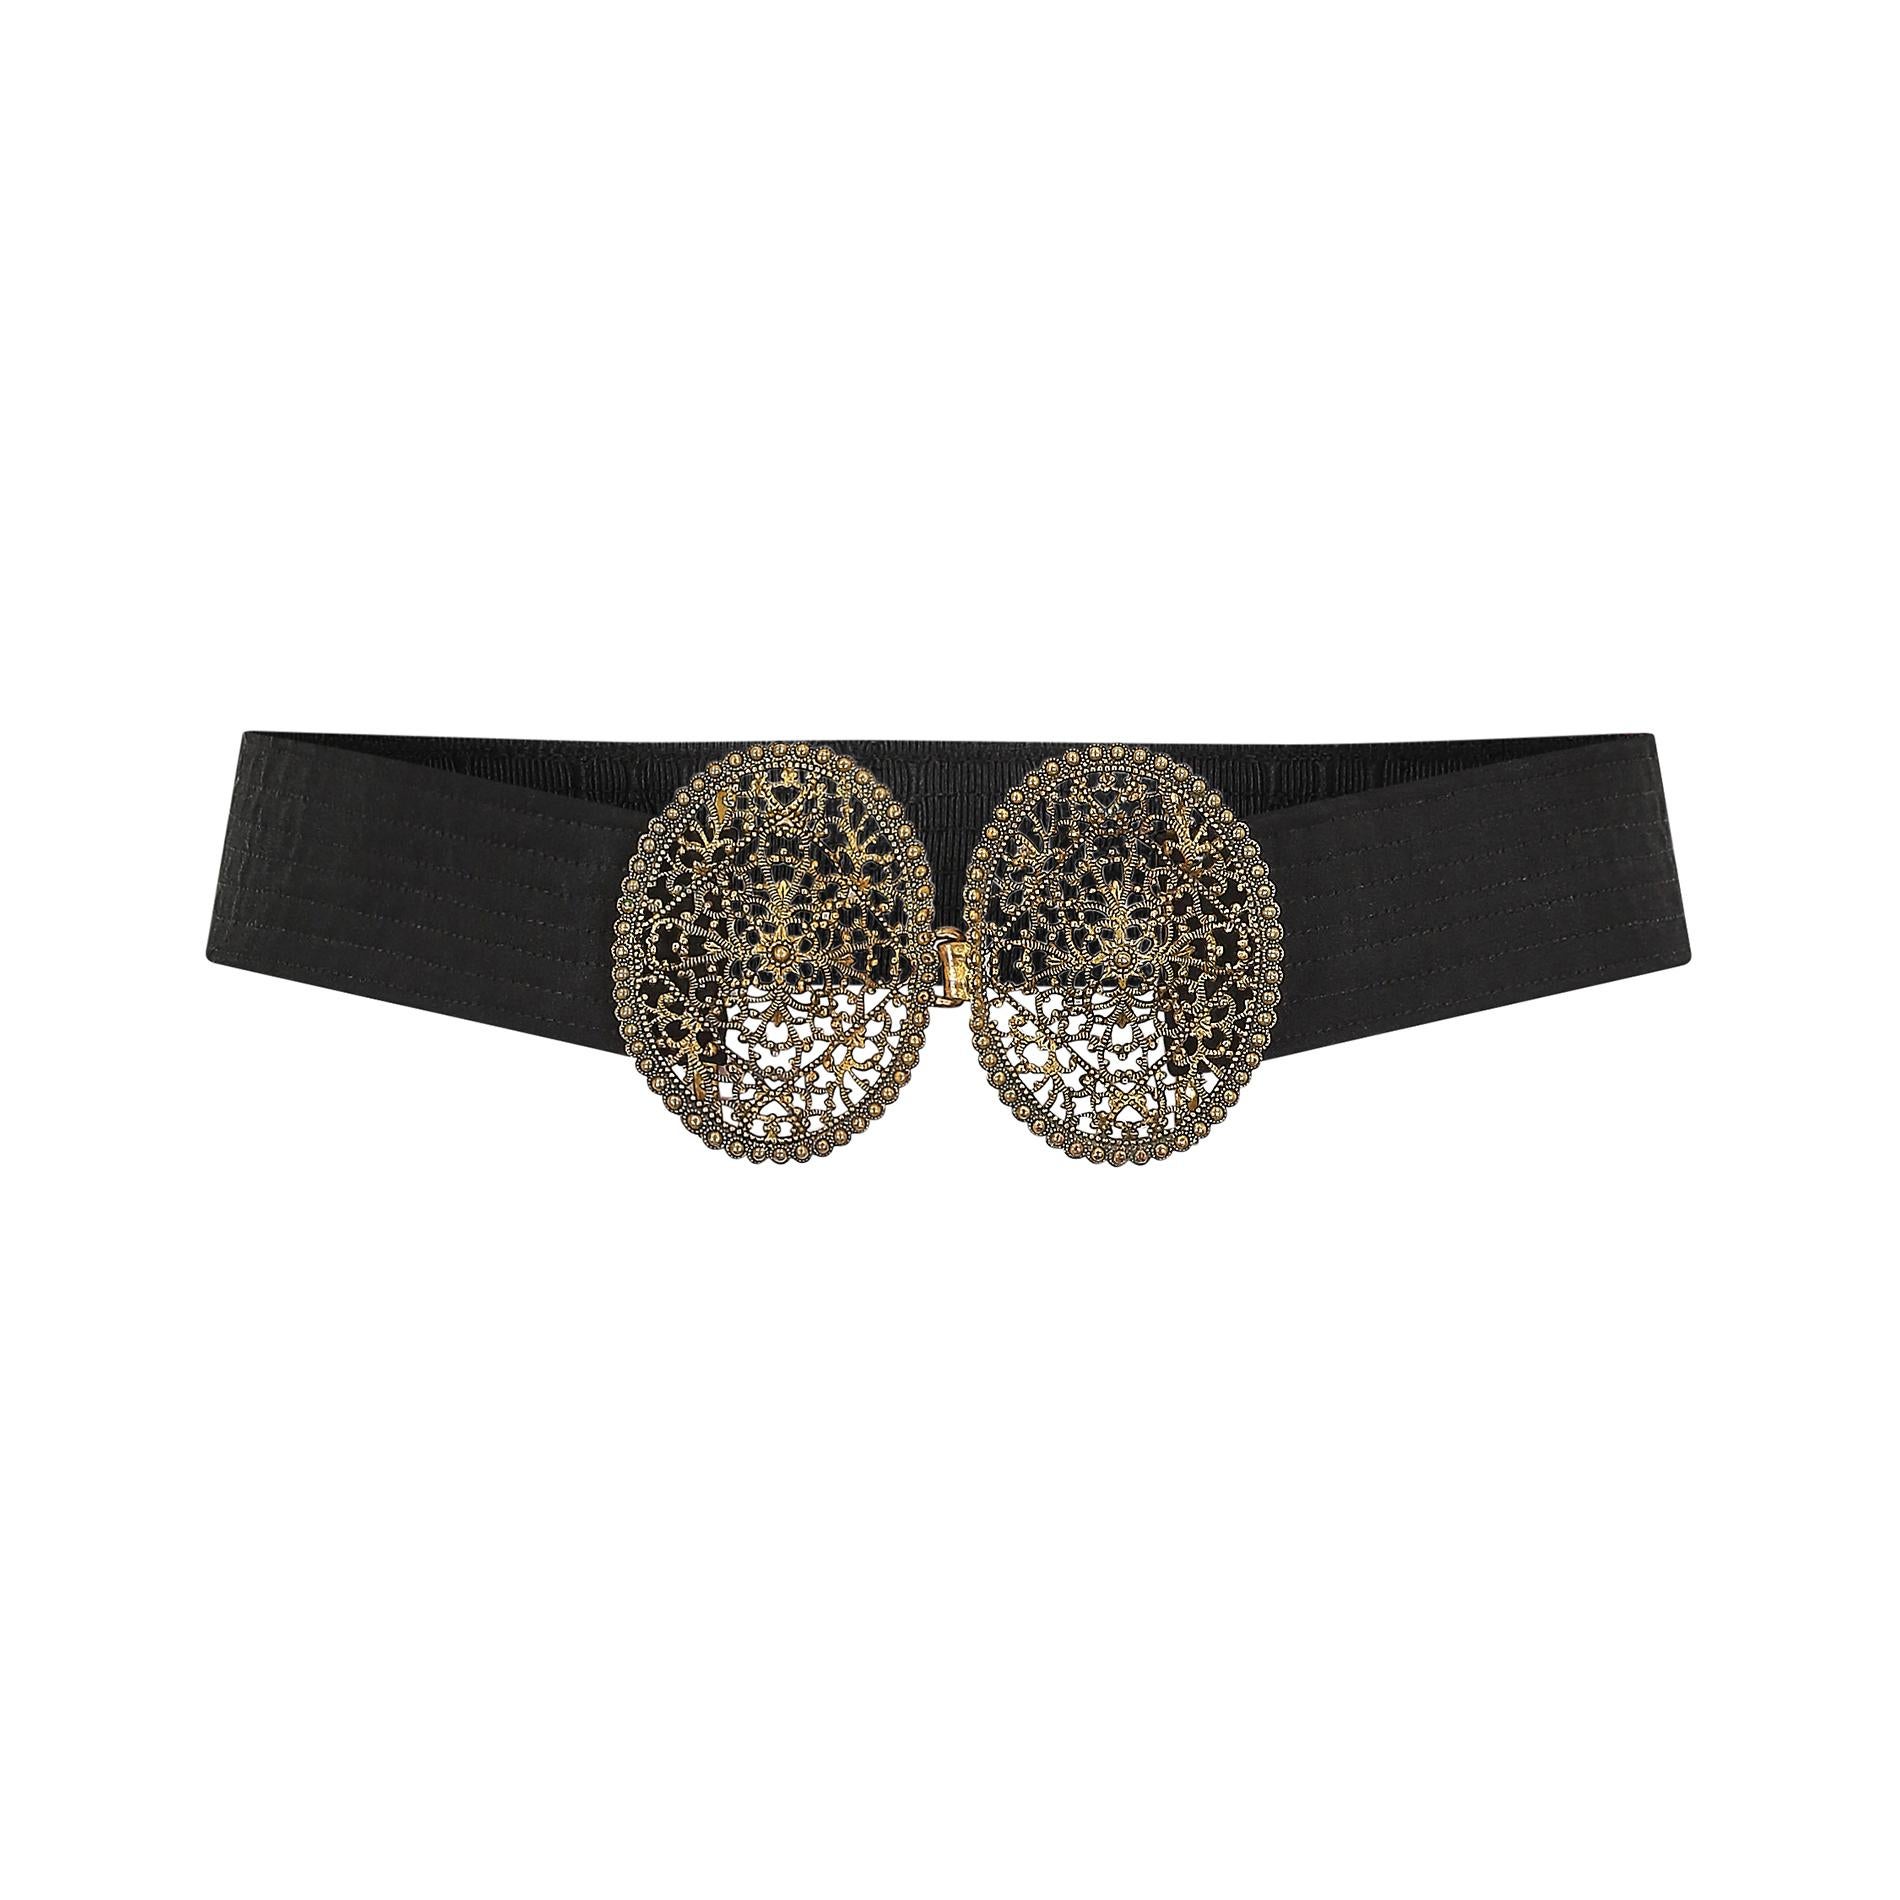 1920s - 1930s but conceivably much earlier, black fabric and gold filigree style belt.  Featuring a black crepe waistband which has been set atop a stronger woven fabric and machine stitched in close-set horizontal bands.  The brass belt buckle is